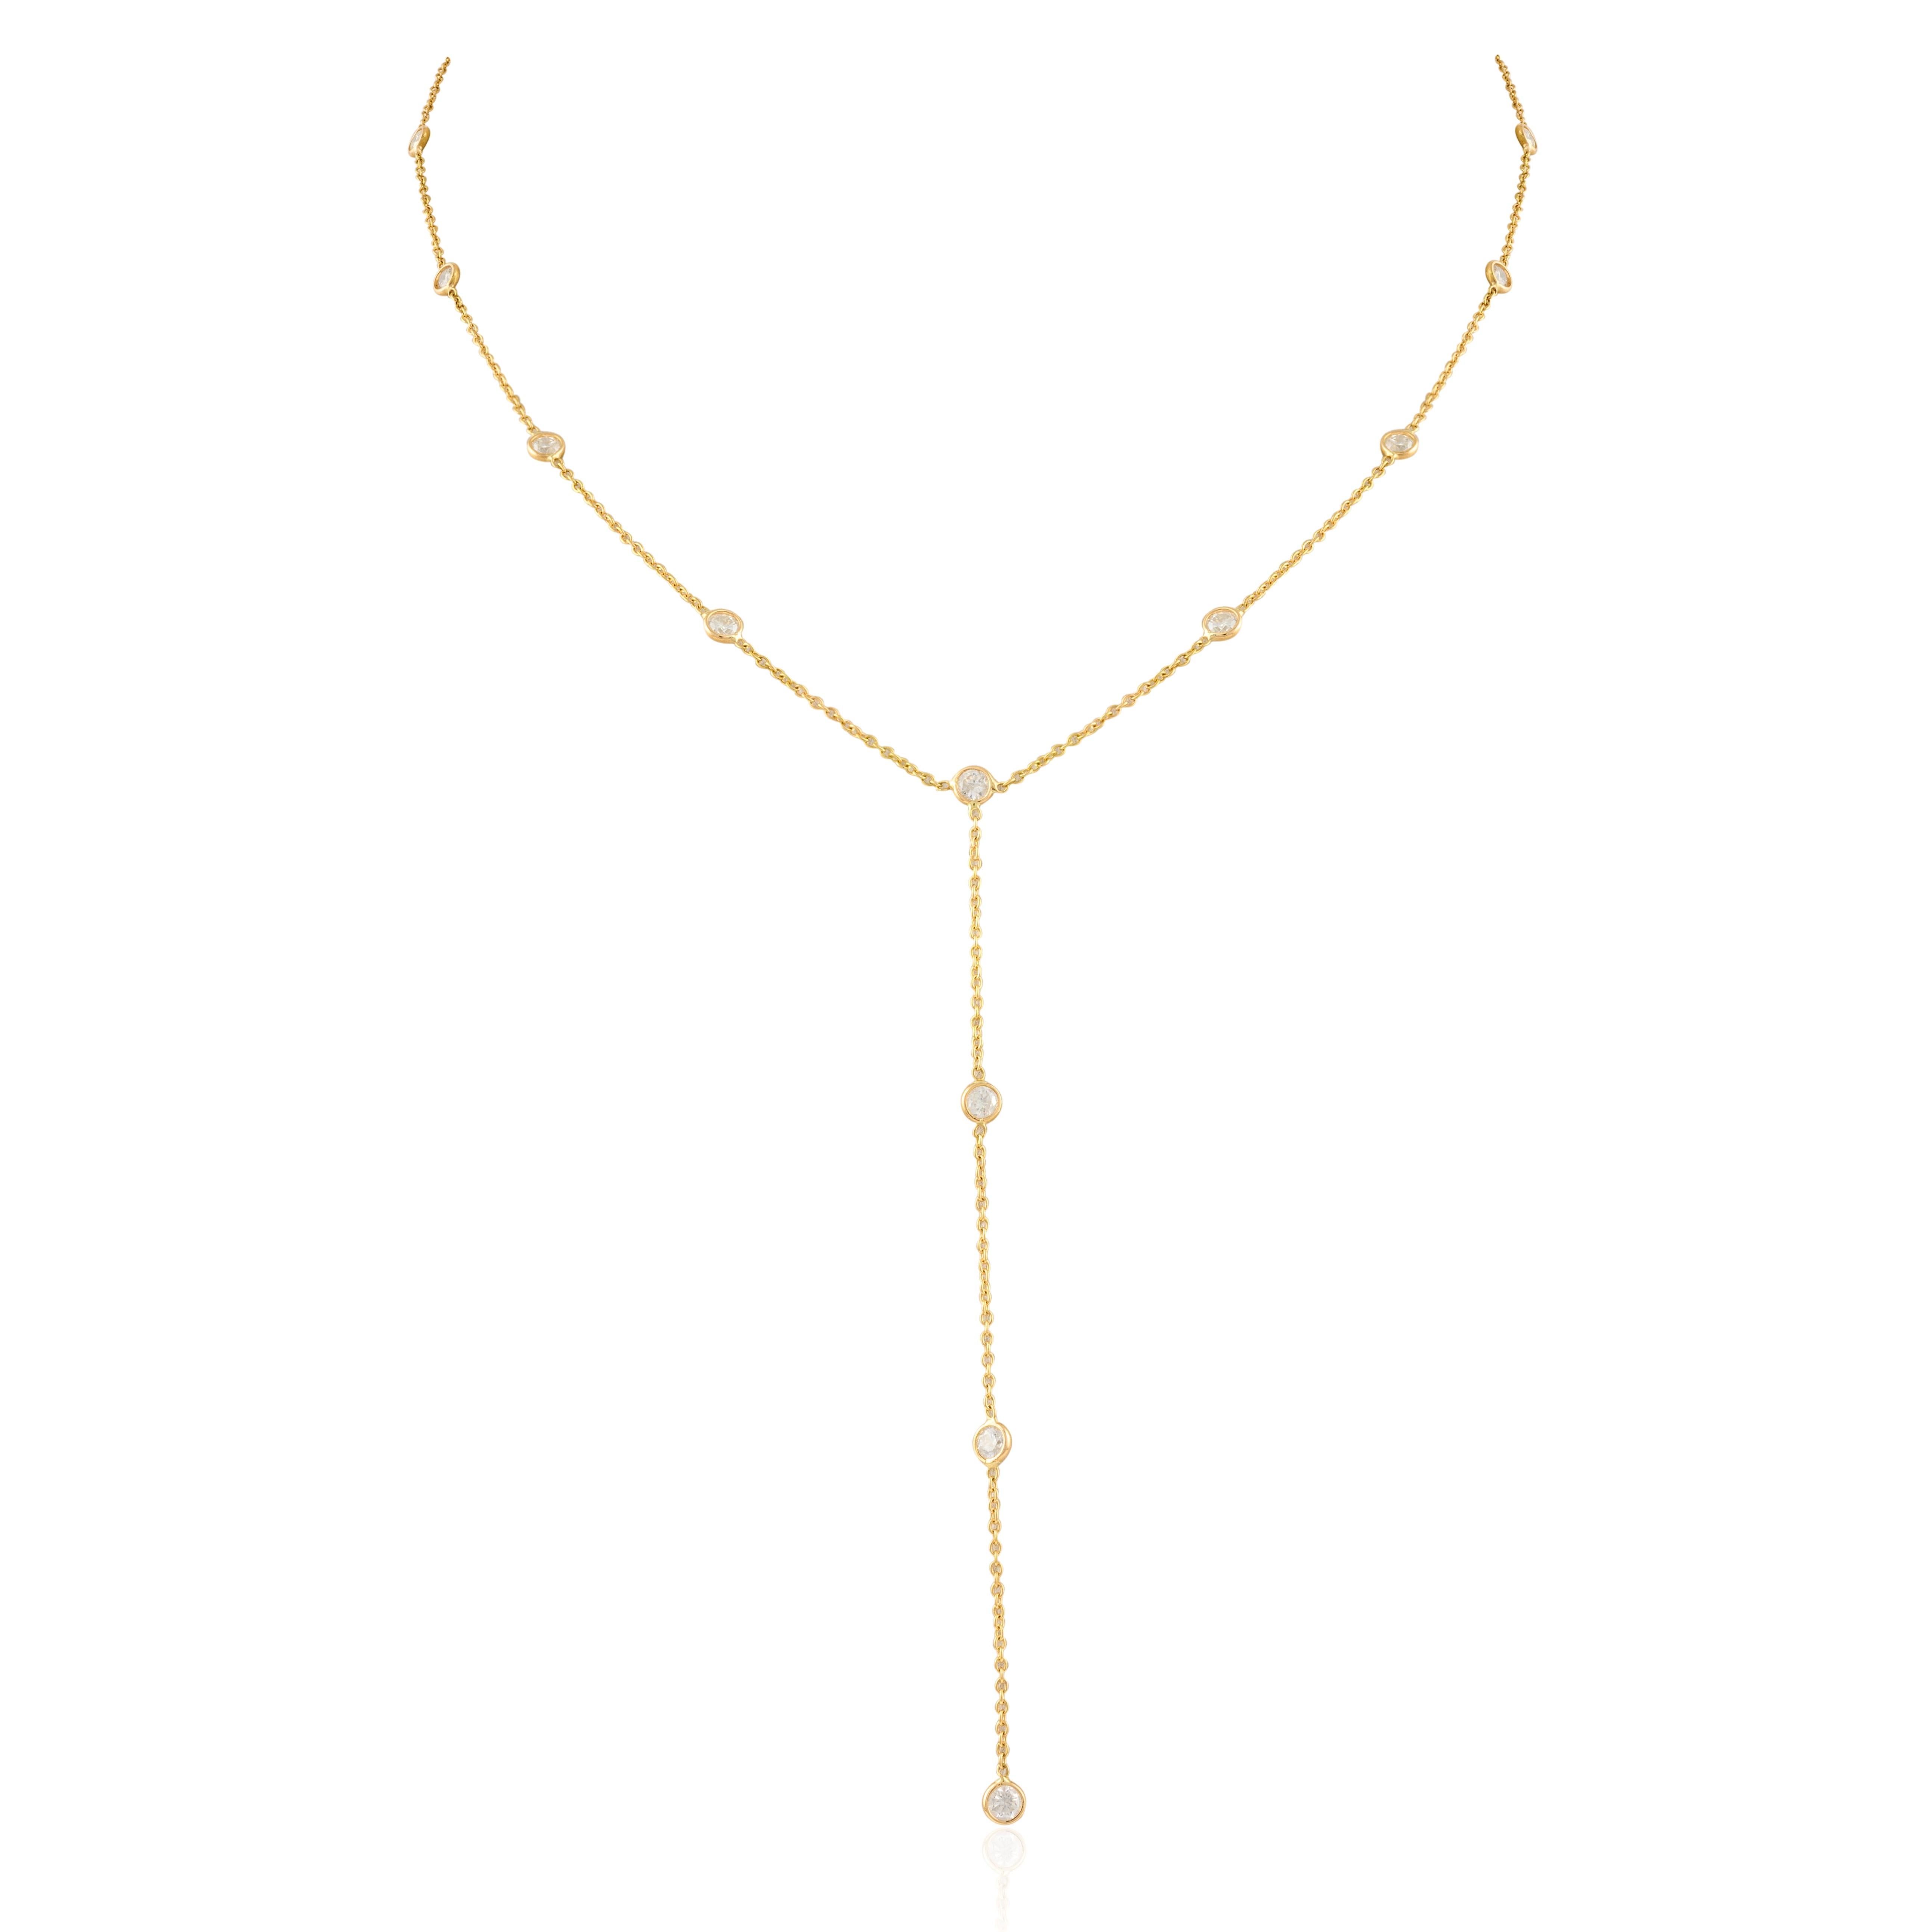 Round Cut 18kt Solid Yellow Gold 1 CTW Diamond Lariat Necklace, Gift For Her Christmas For Sale